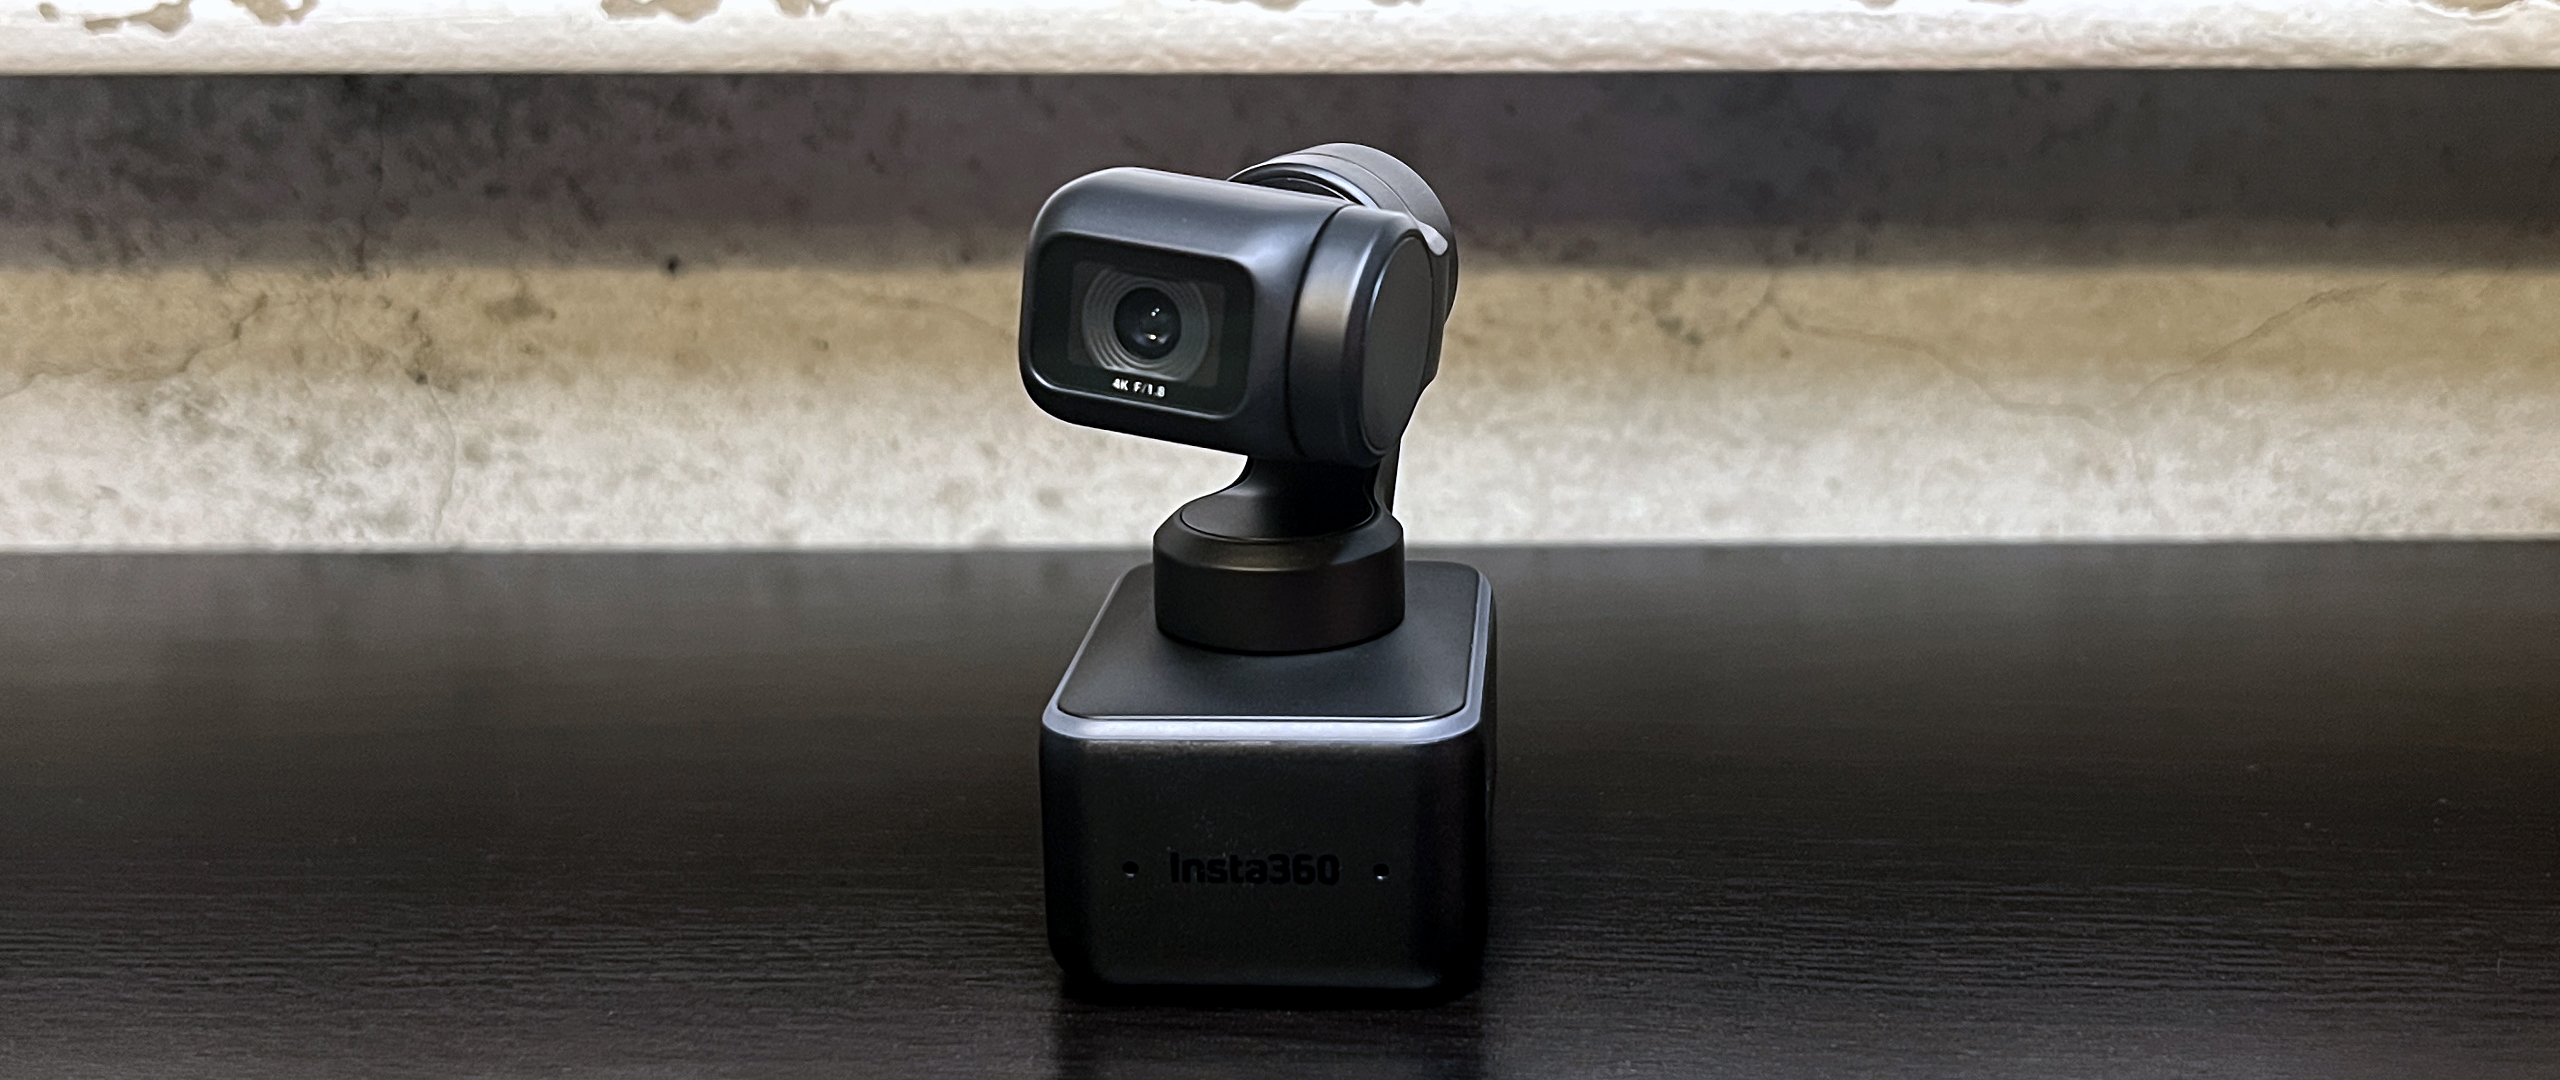 Insta360 Link Review: A 360-degree Action Cam in Webcam Form